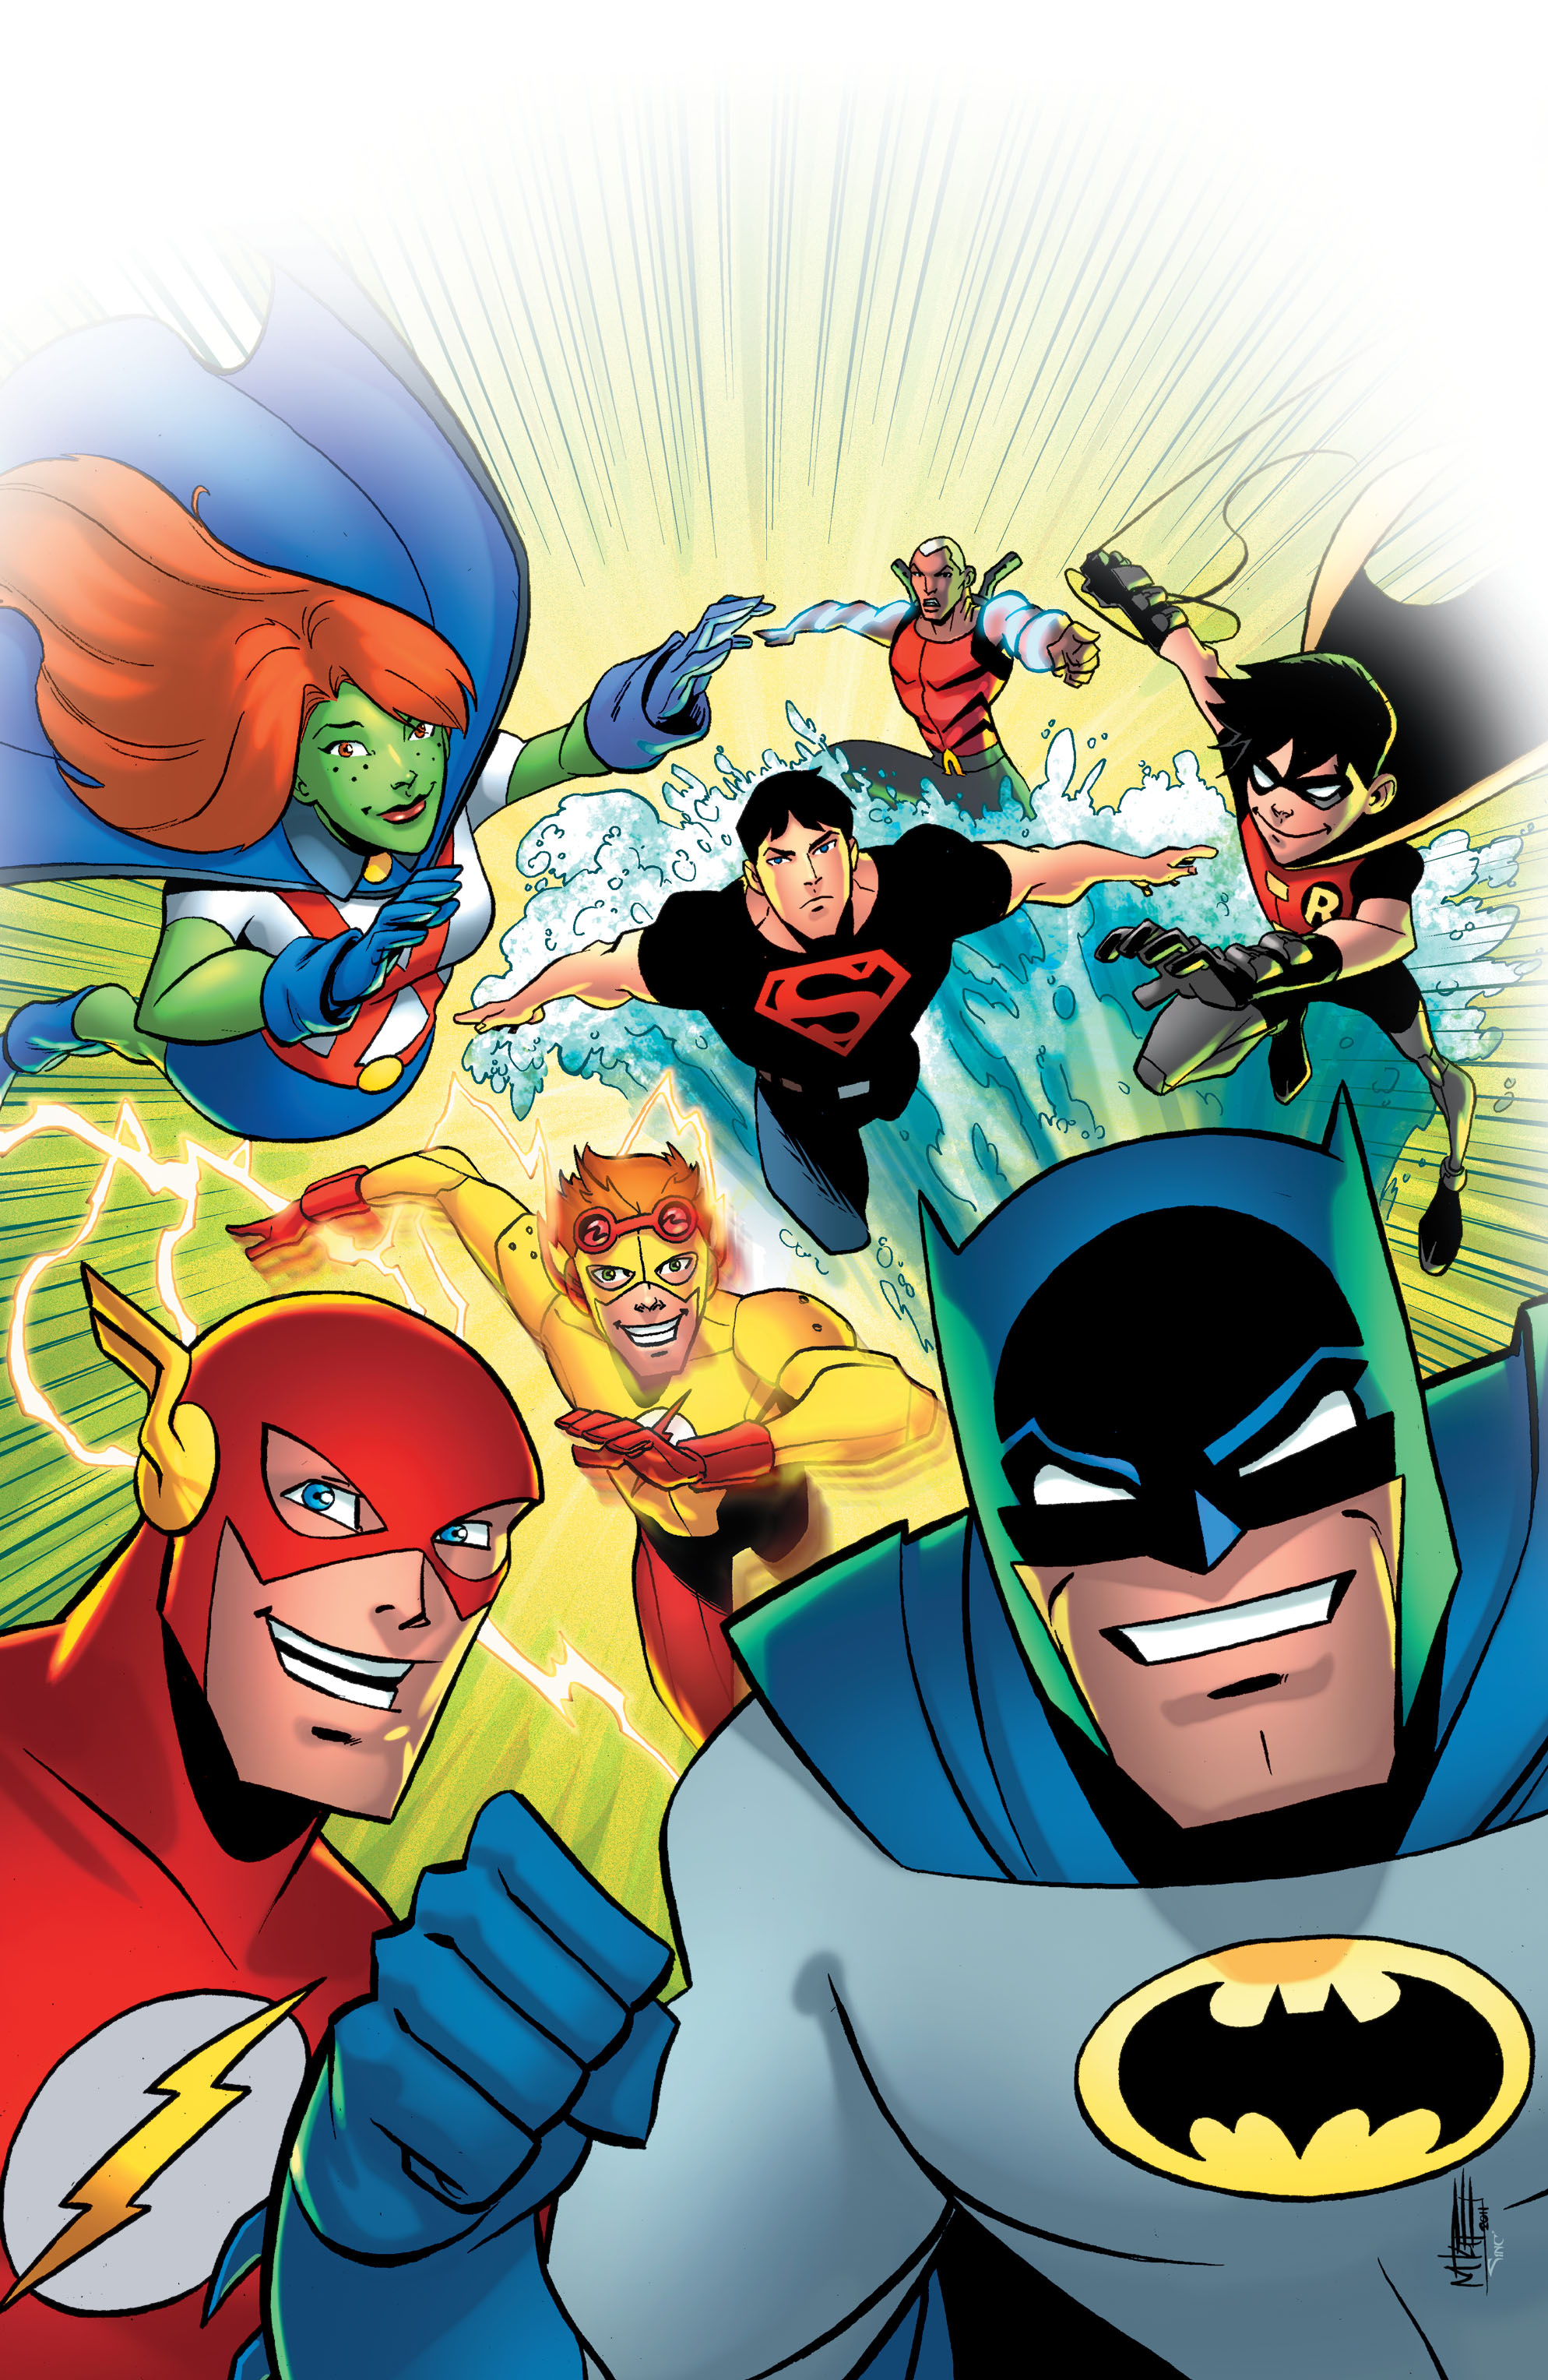 Justice League - The Brave and the Bold (Kids TV Favorites)